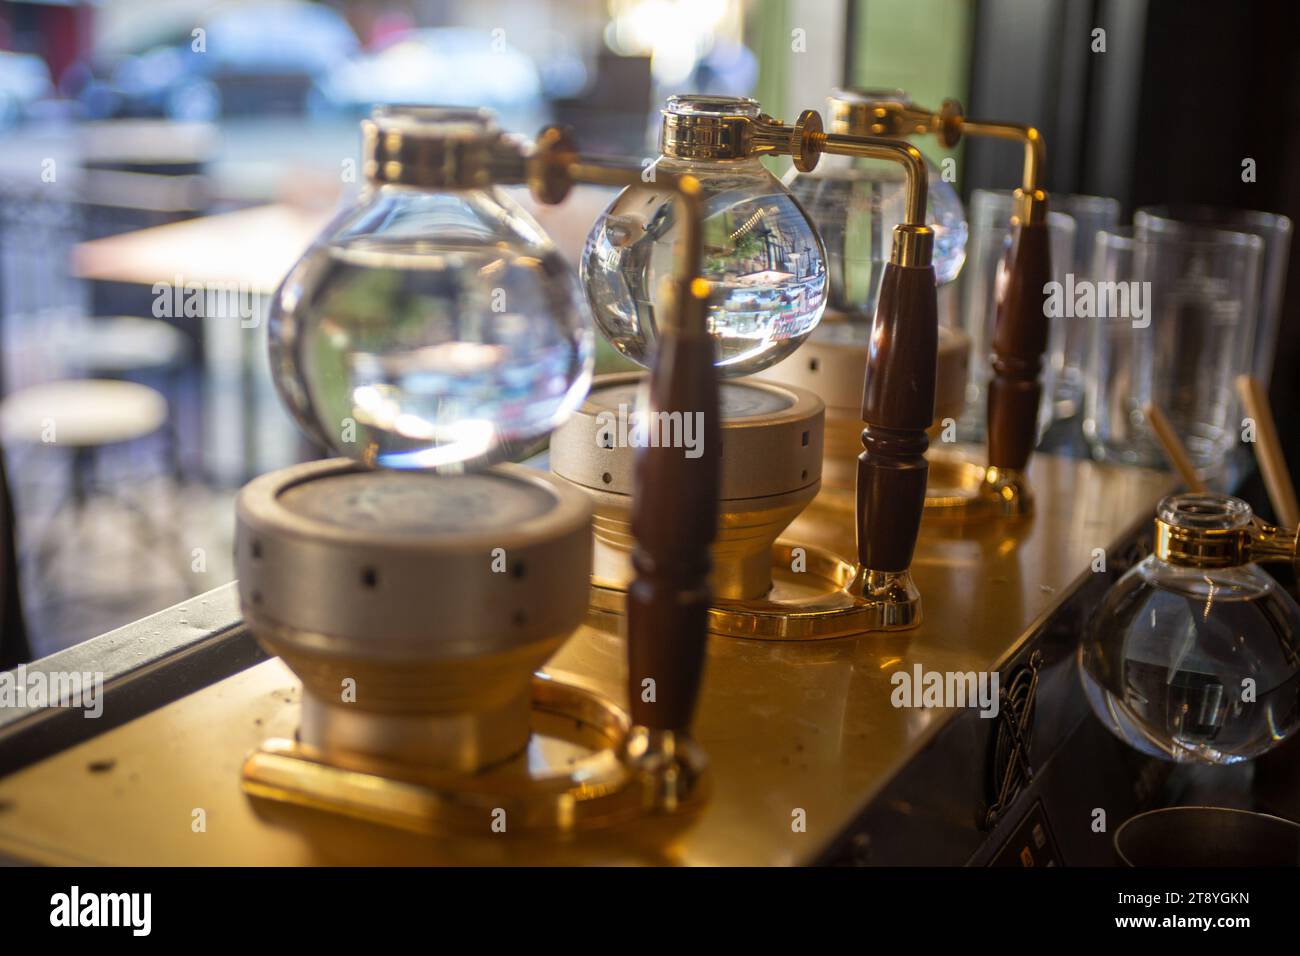 Japanese style Siphon Coffee or tea makers Stock Photo